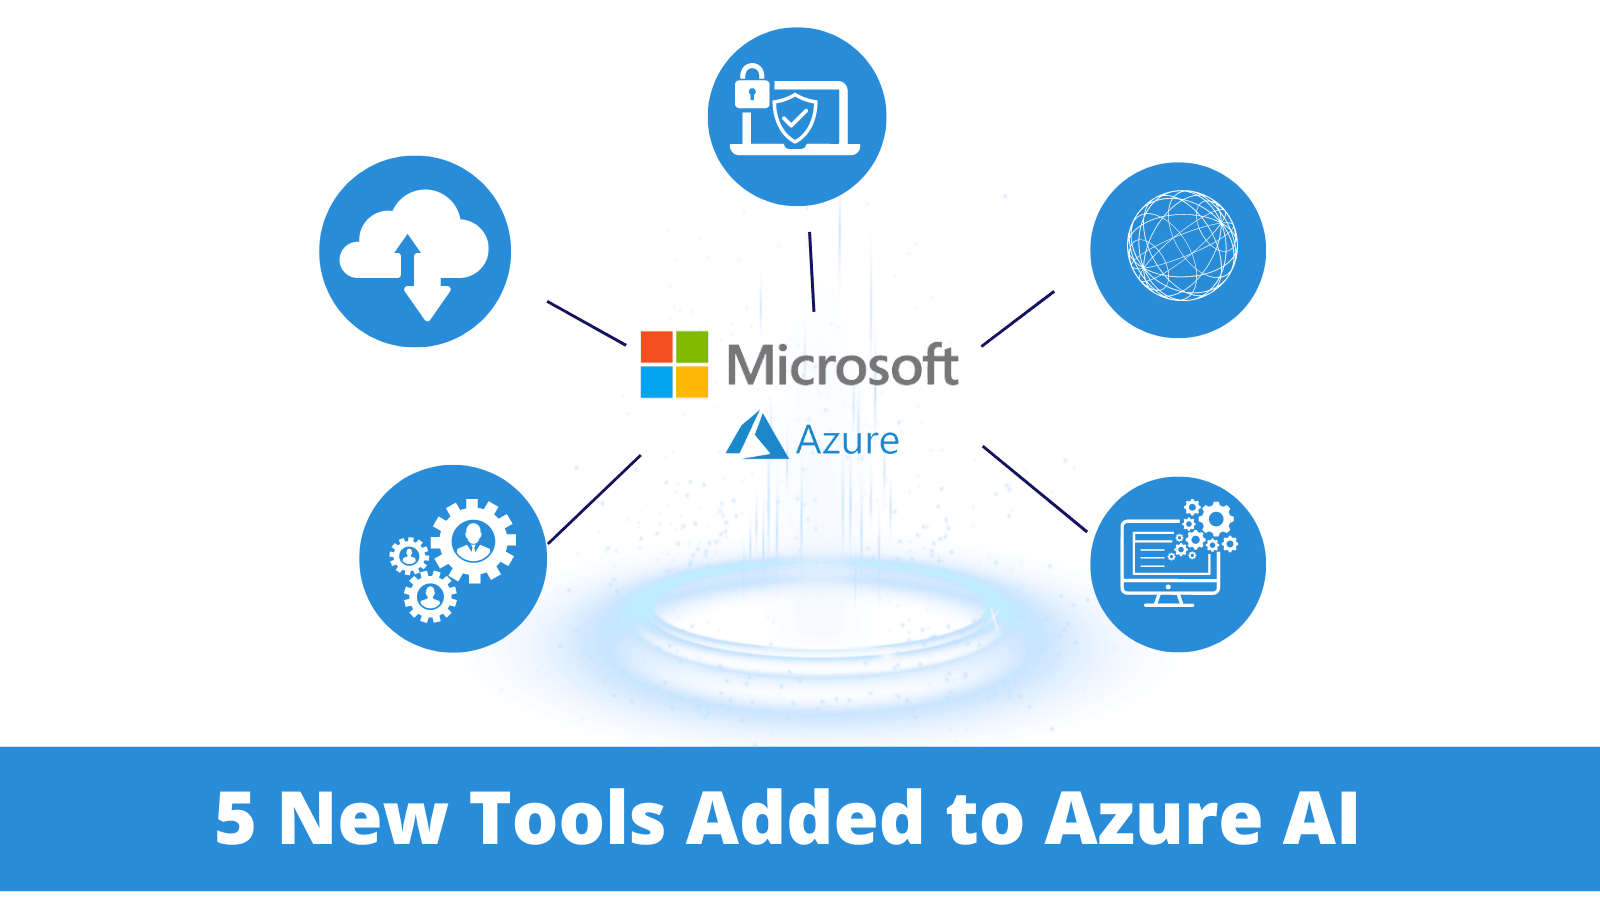 5 New Tools Added to Azure A